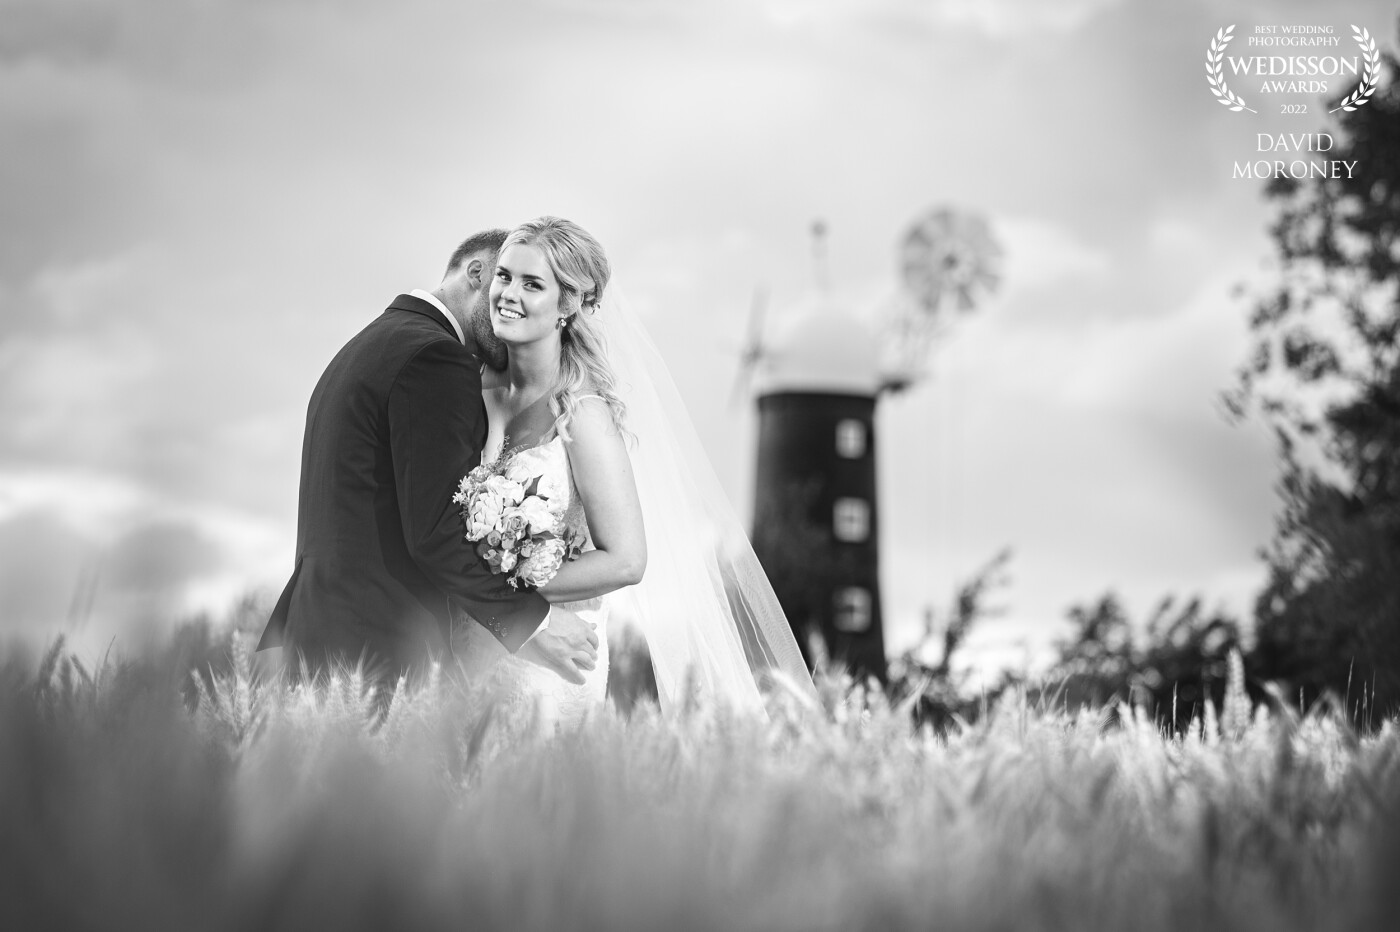 A walk through field in the evening sun, an old windmill and a beautiful bride with her handsome groom all I had to do was take the picture.